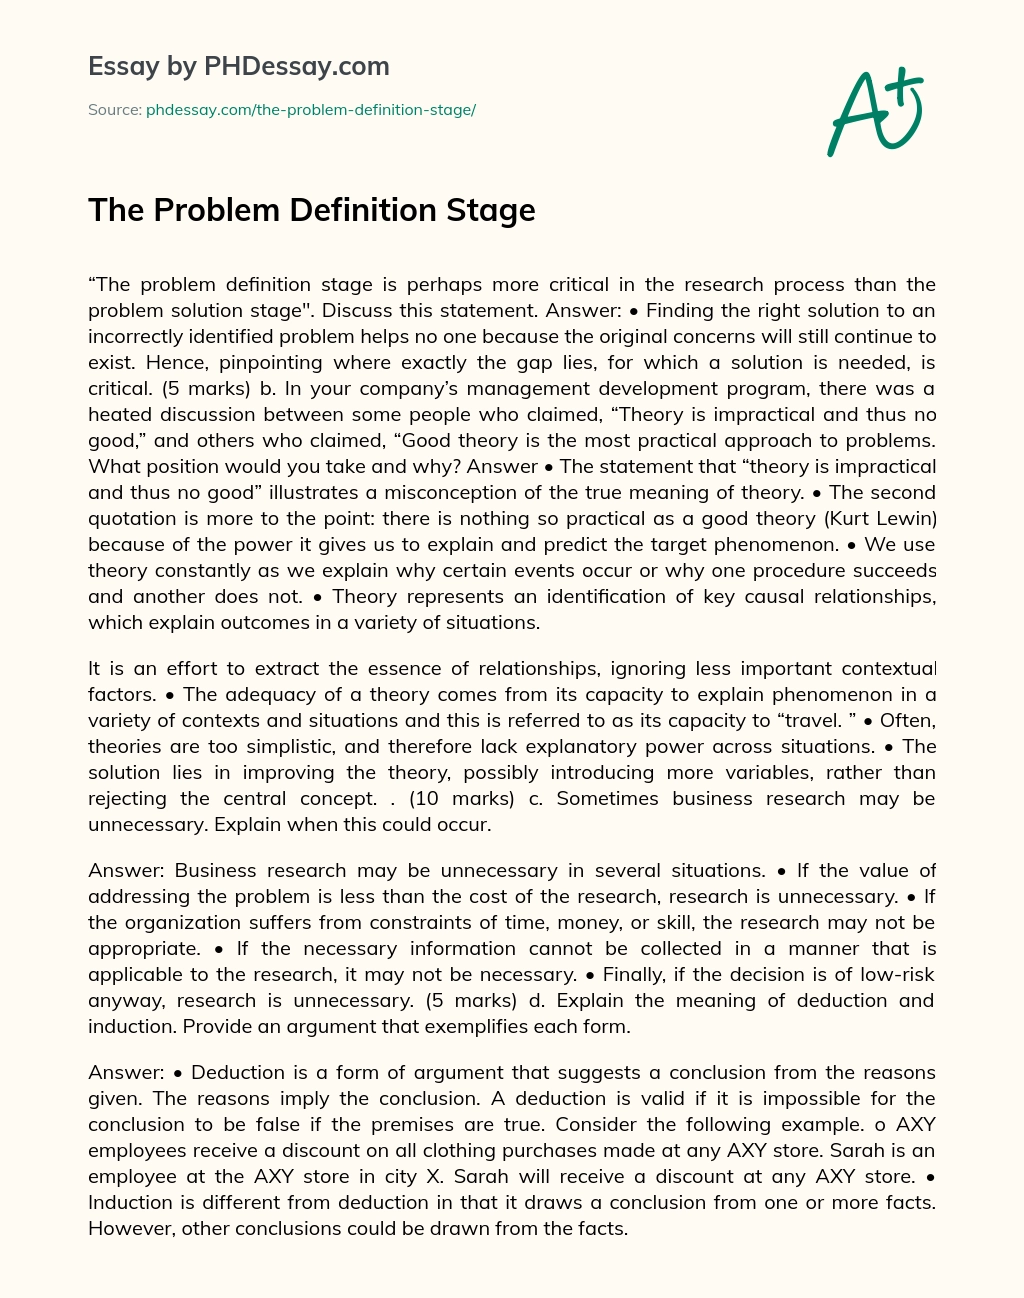 The Problem Definition Stage essay